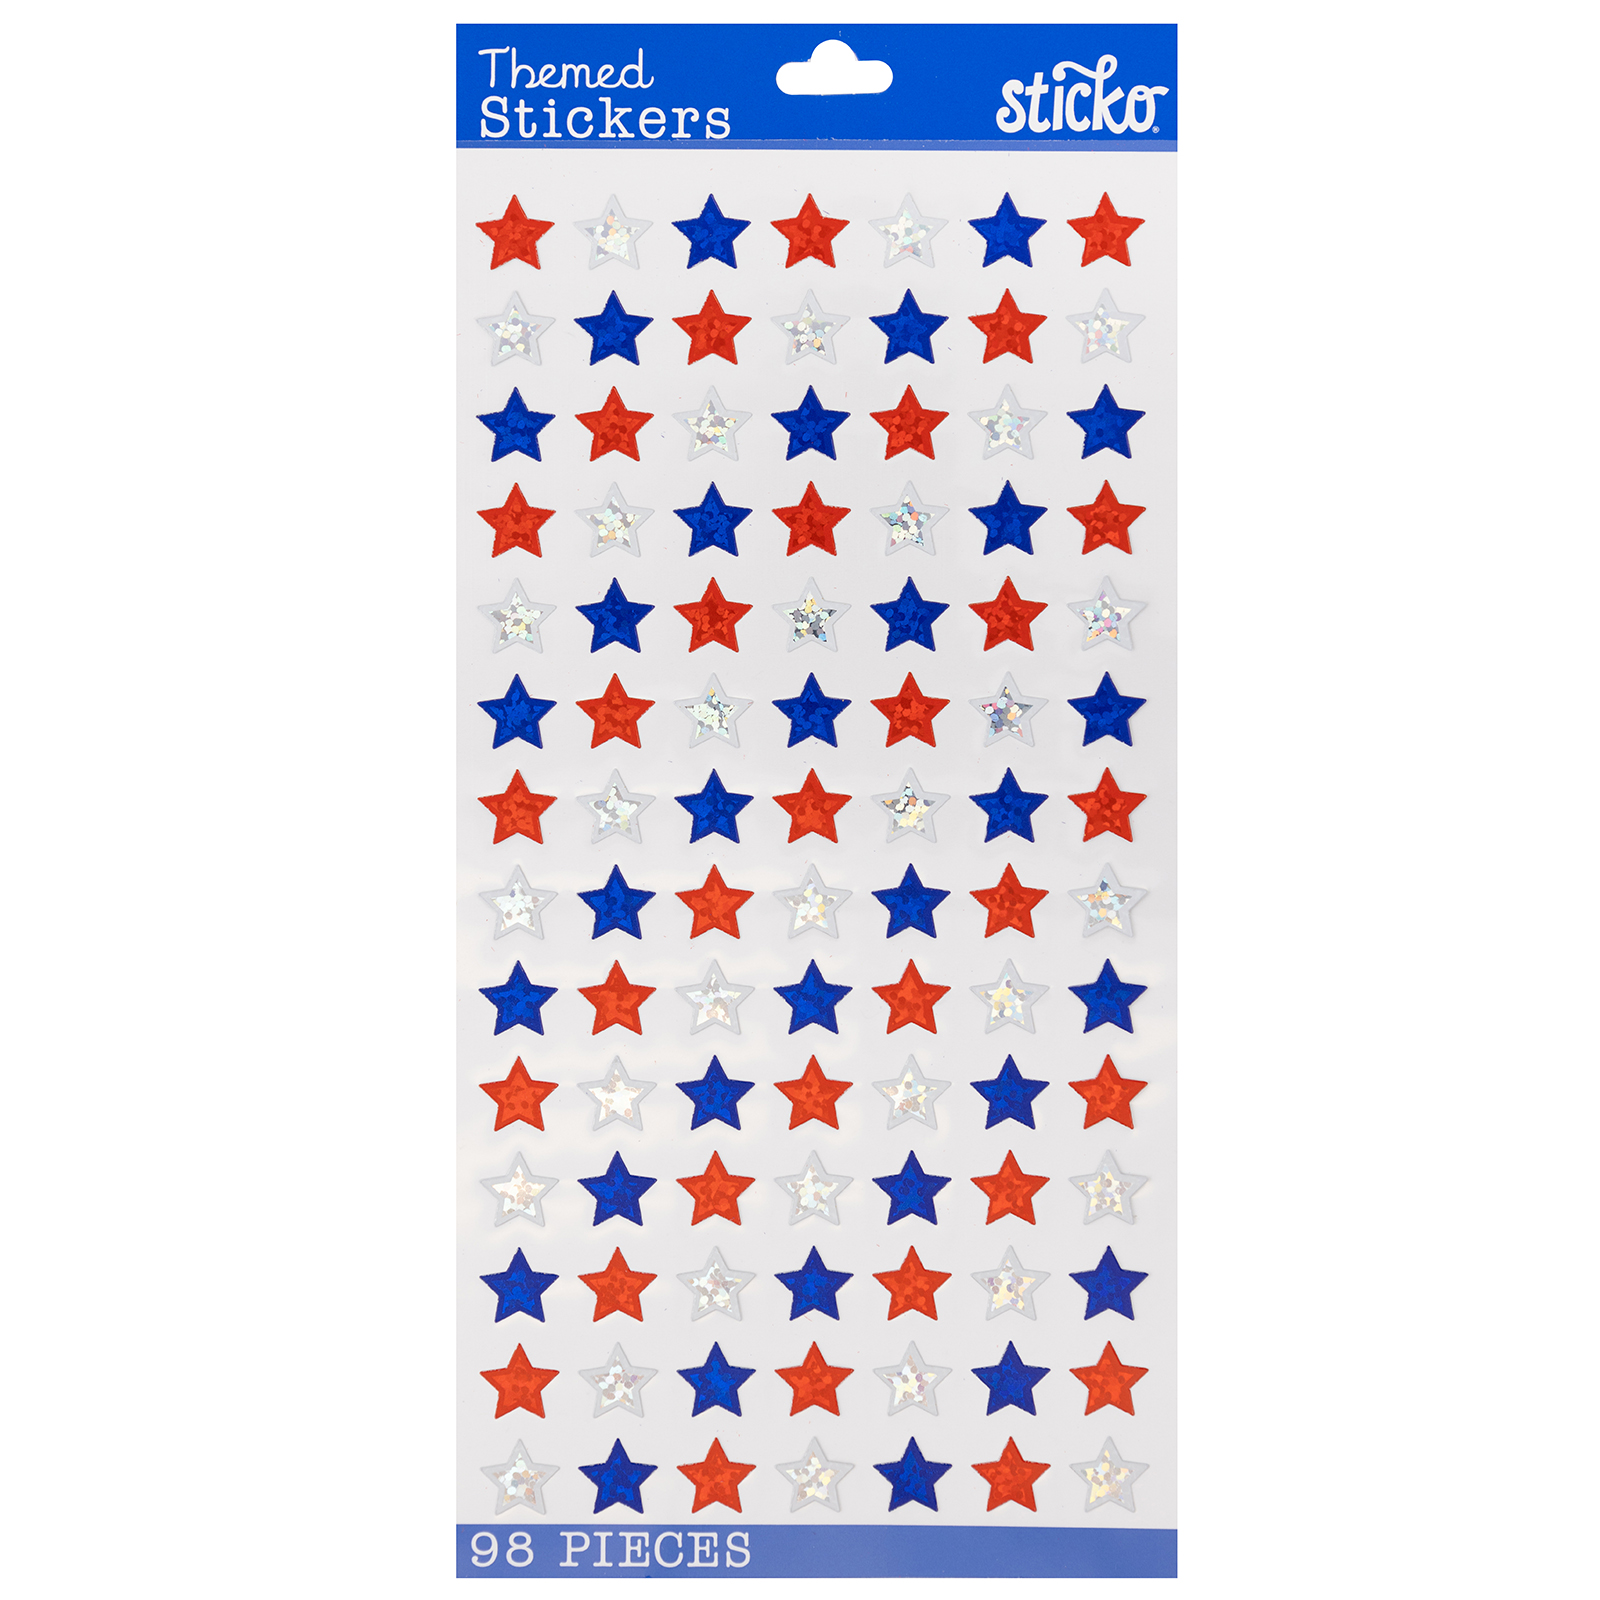 Sticko Solid Classic 4th Of July Multicolor Star Repeats Plastic Stickers, 98 Piece - image 1 of 4